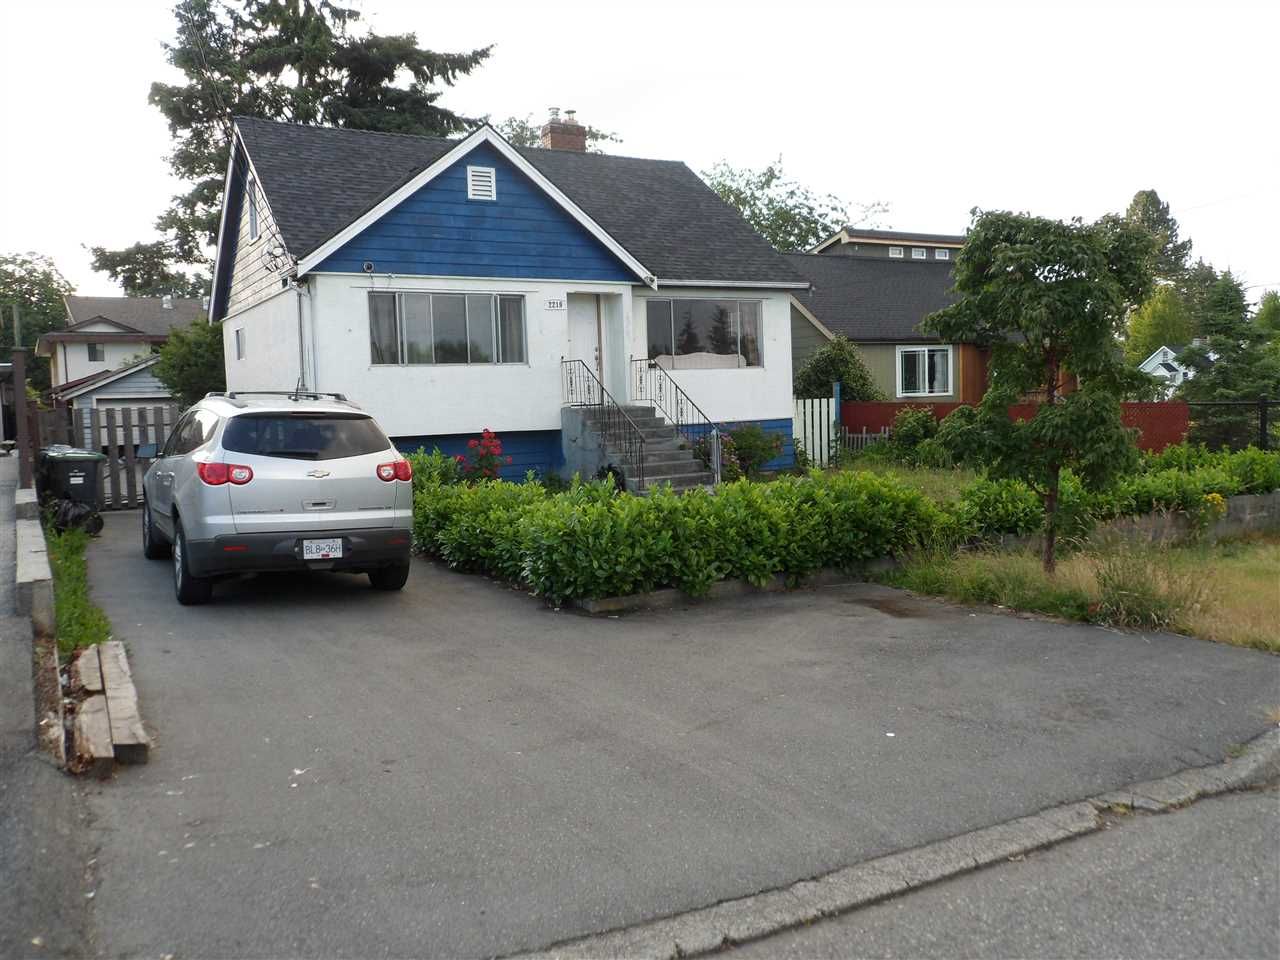 Main Photo: 2219 DUBLIN STREET in New Westminster: Connaught Heights House for sale : MLS®# R2078263